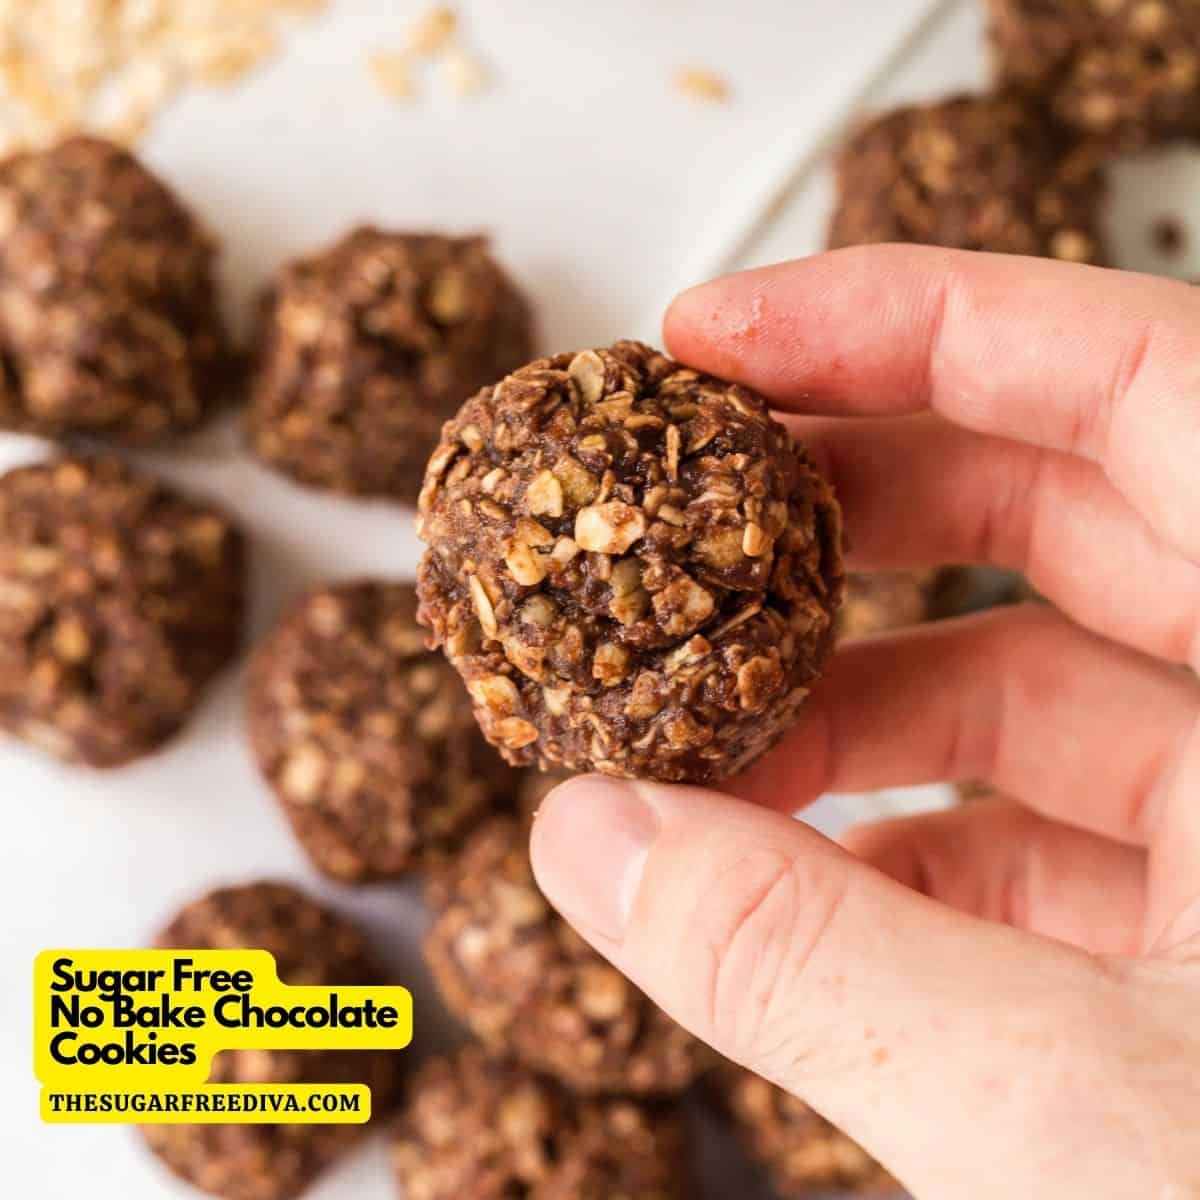 No Bake Sugar Free Chocolate Cookies, a simple and delicious dessert recipe made with oatmeal, peanut butter, and unsweetened cocoa. GF SF